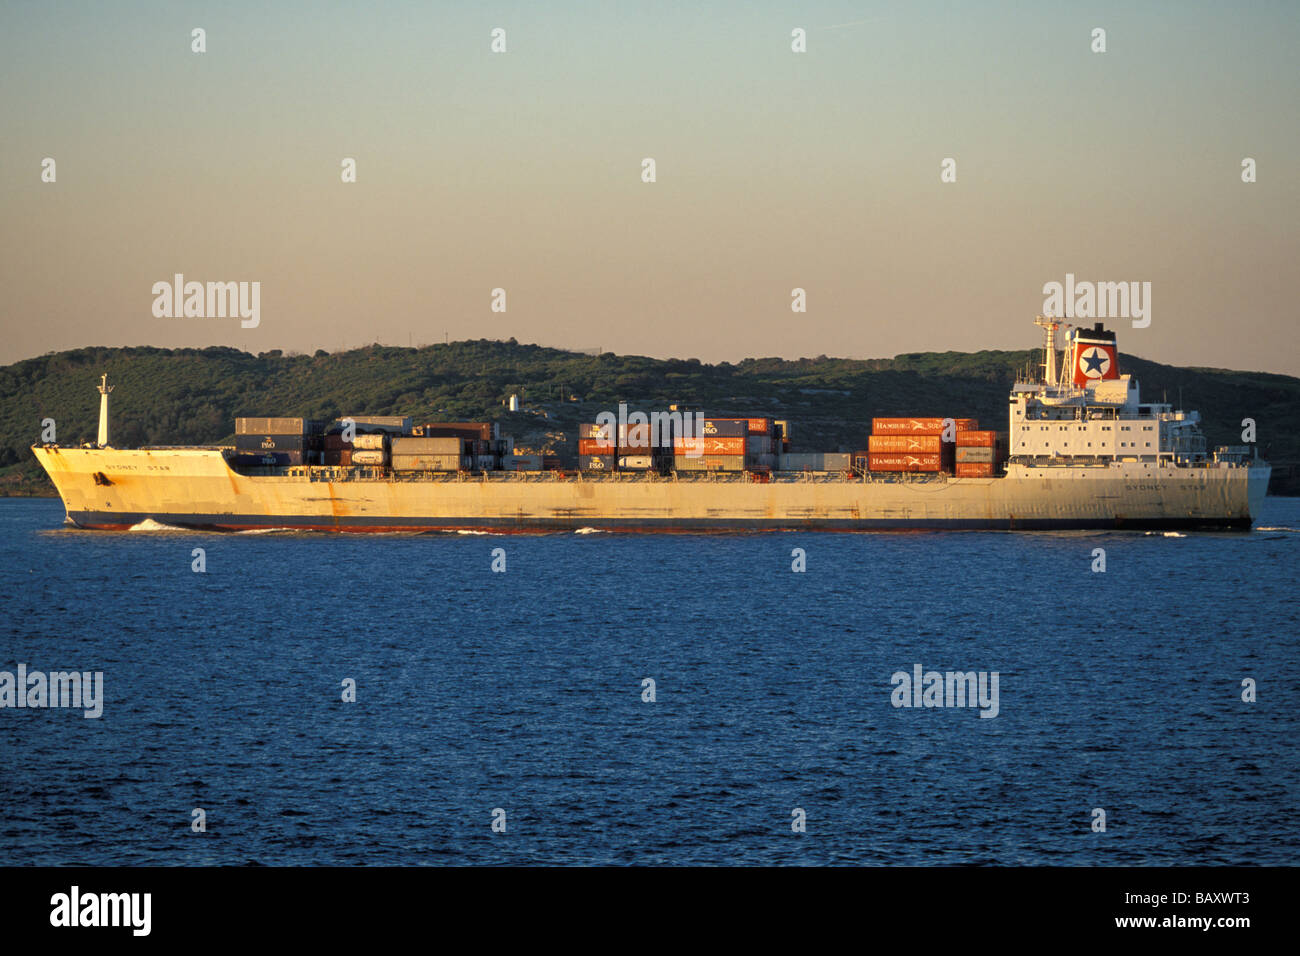 Container ship Sydney Star just departed from the container terminal at Port Botany on Botany Bay, New South Wales Australia Stock Photo